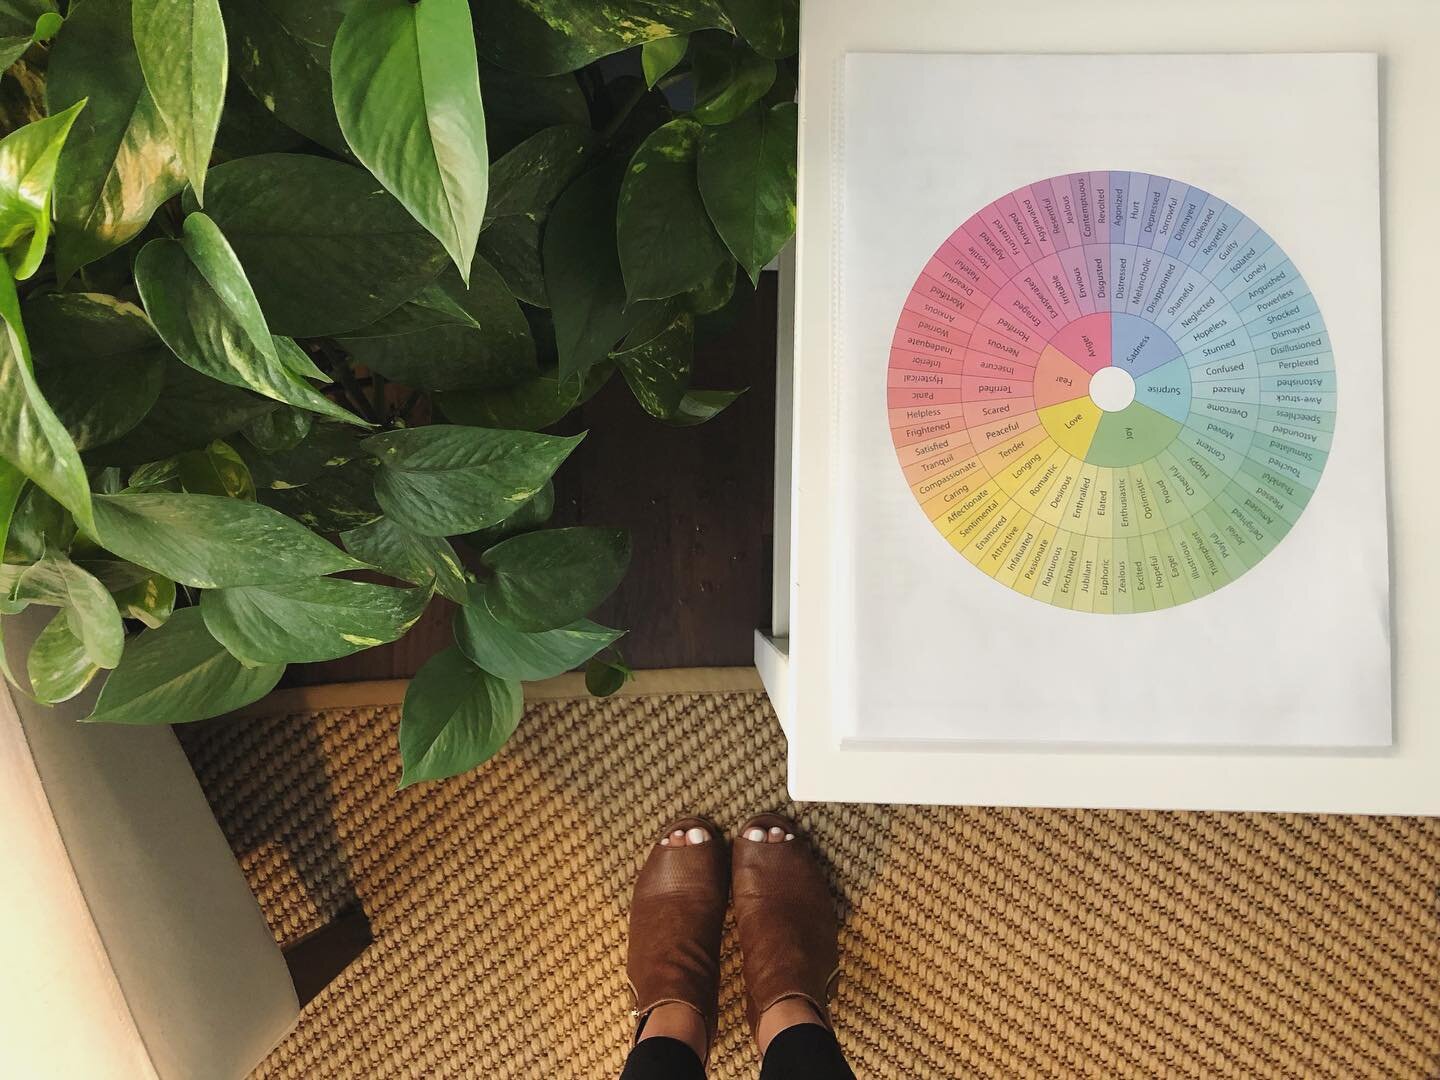 Sometimes you don&rsquo;t know how you feel, and that&rsquo;s okay!

Feelings/ emotions can be hard to identify, especially if we&rsquo;ve never learned about them.

Luckily, in my office at @coasthealthcollective I now have a feelings wheel to help 